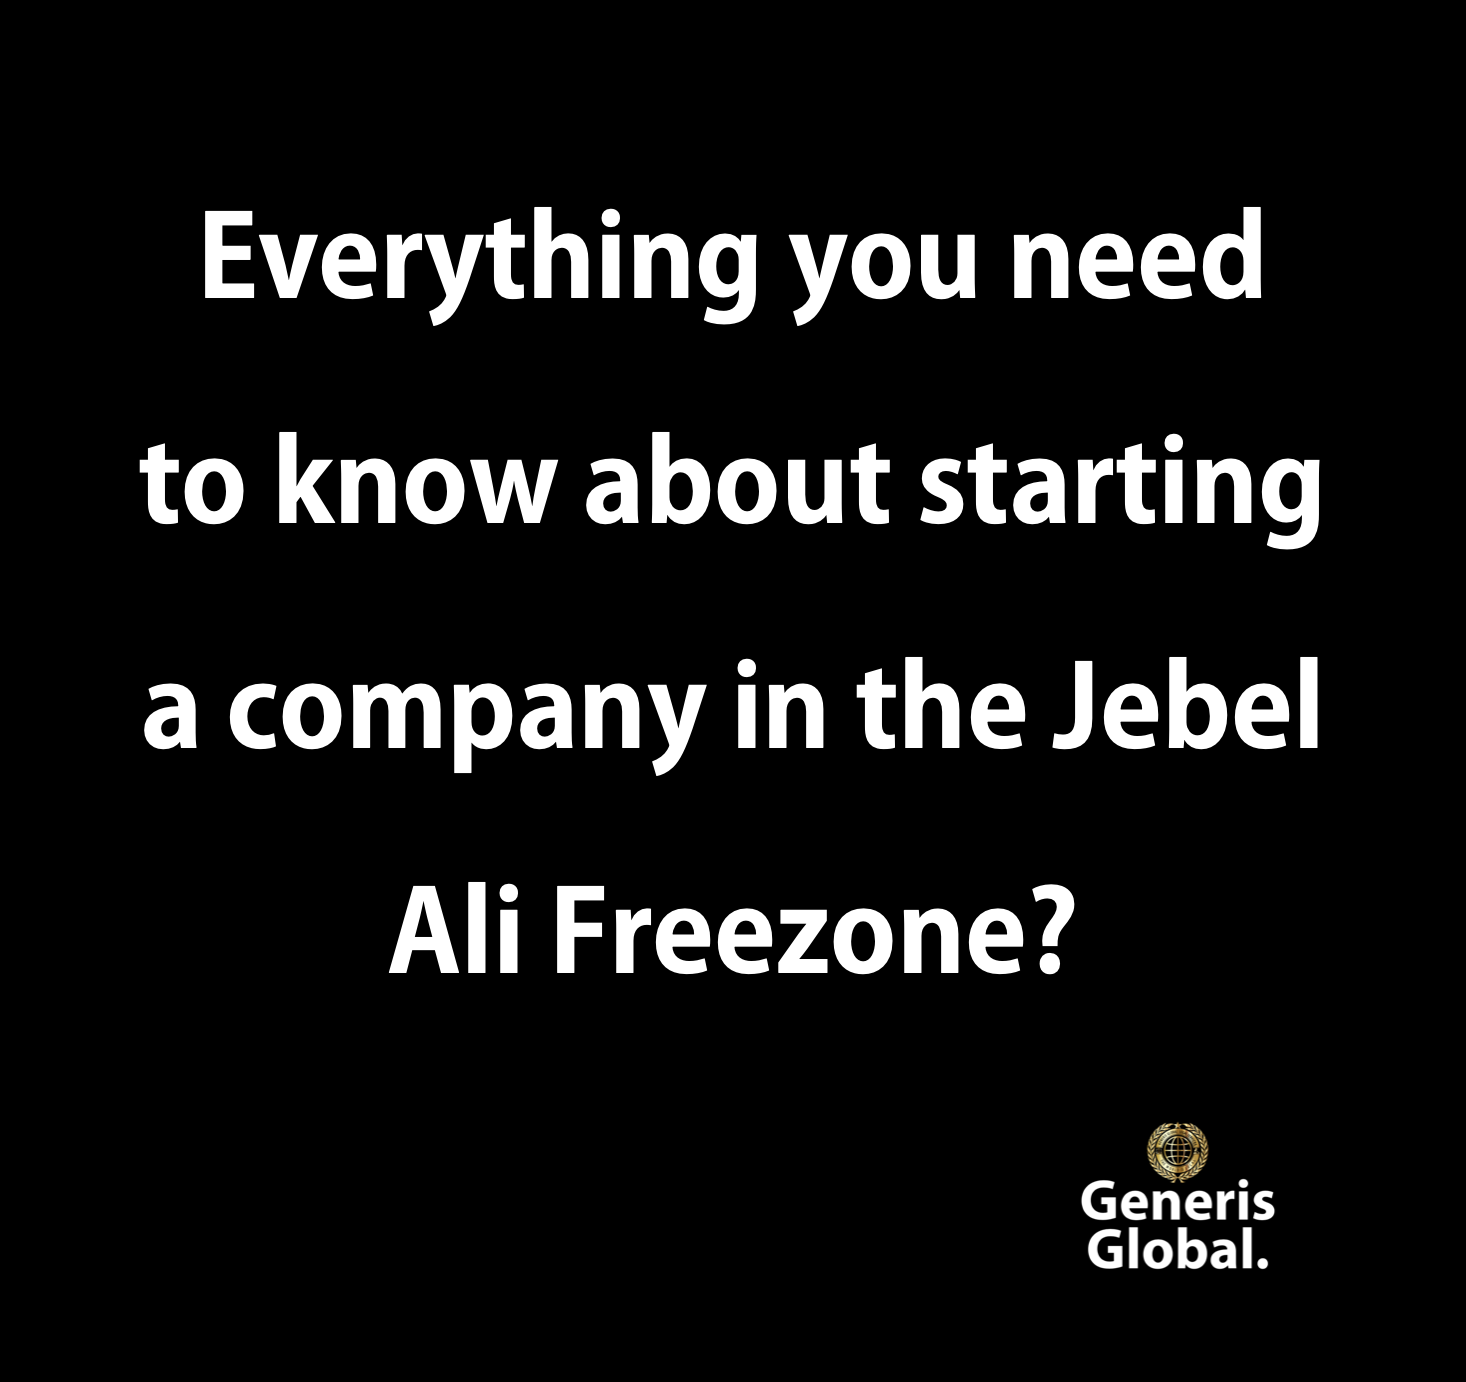 starting a company in the Jebel Ali Freezone